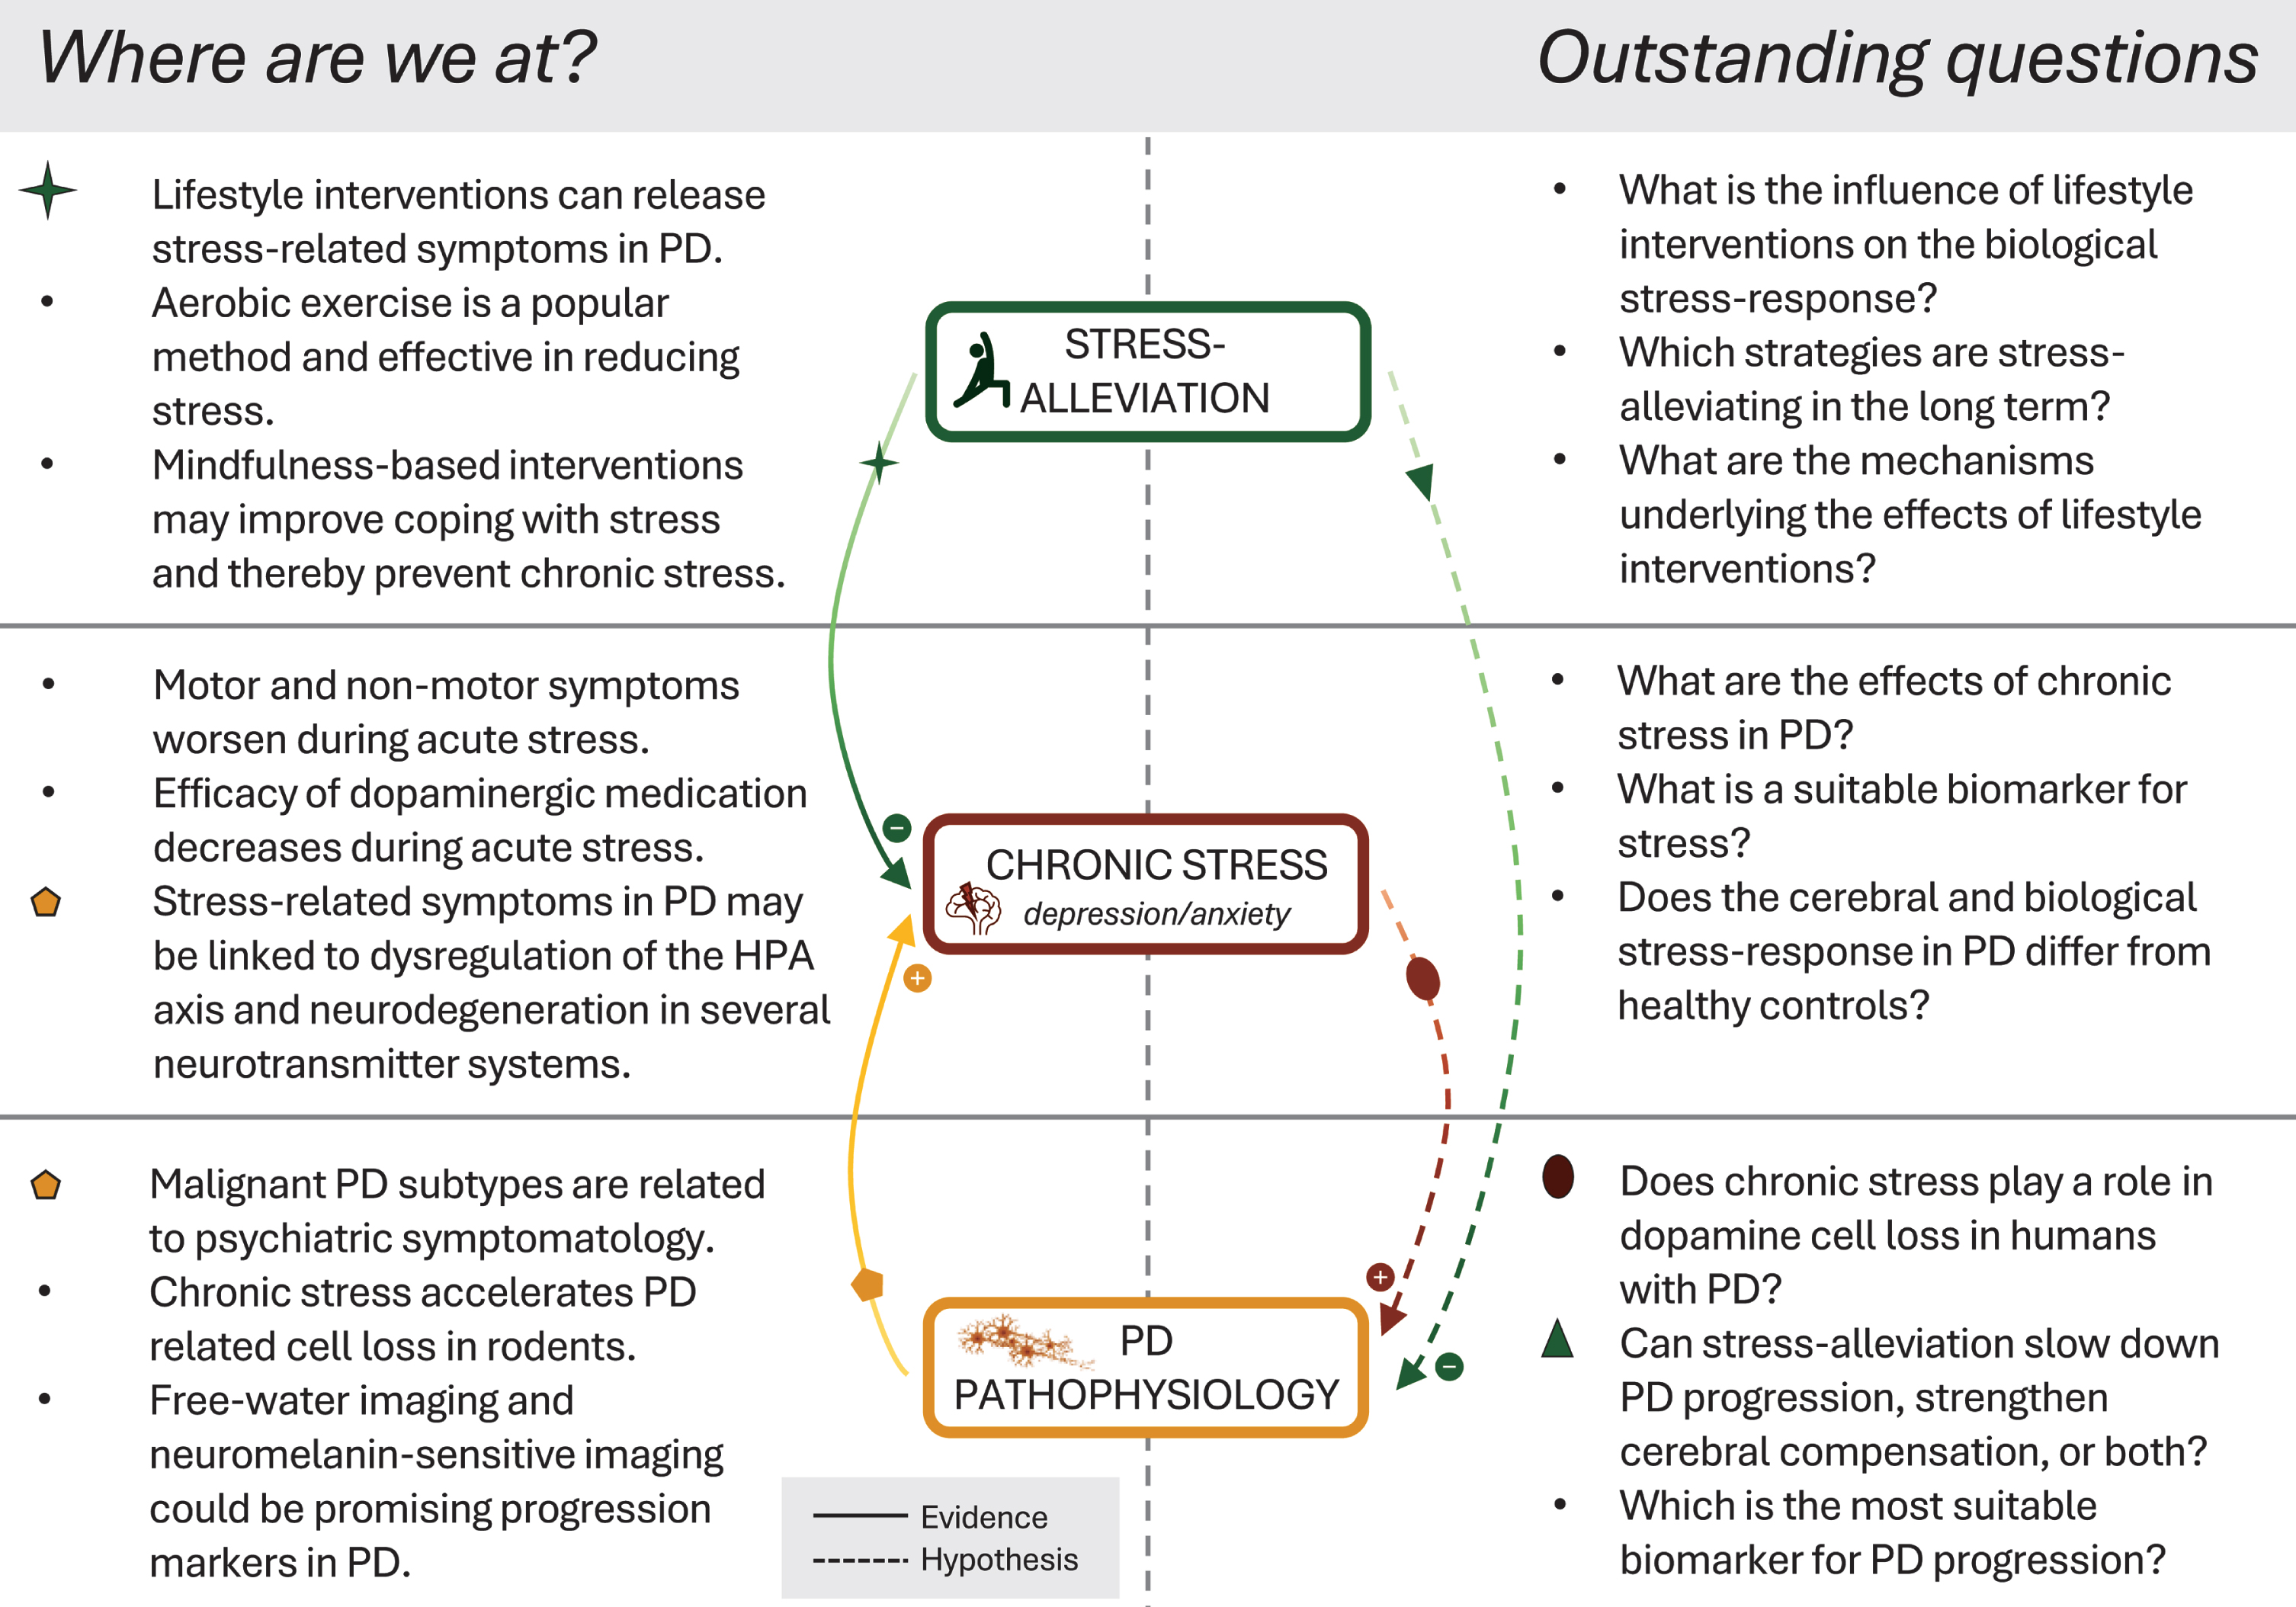 Current advances and outstanding questions in the field. Left-hand panel illustrates the most crucial findings of recent evidence. Solid lines indicate the influence of stress-alleviation on chronic stress, and the pathophysiological link of Parkinson’s disease to stress and related non-motor symptoms. Right-hand panel and dashed lines illustrate outstanding questions and hypotheses regarding disease-modifying effects of stress and stress-alleviation in Parkinson’s disease. PD, Parkinson’s disease; HPA, hypothalamic-pituitary-adrenal.